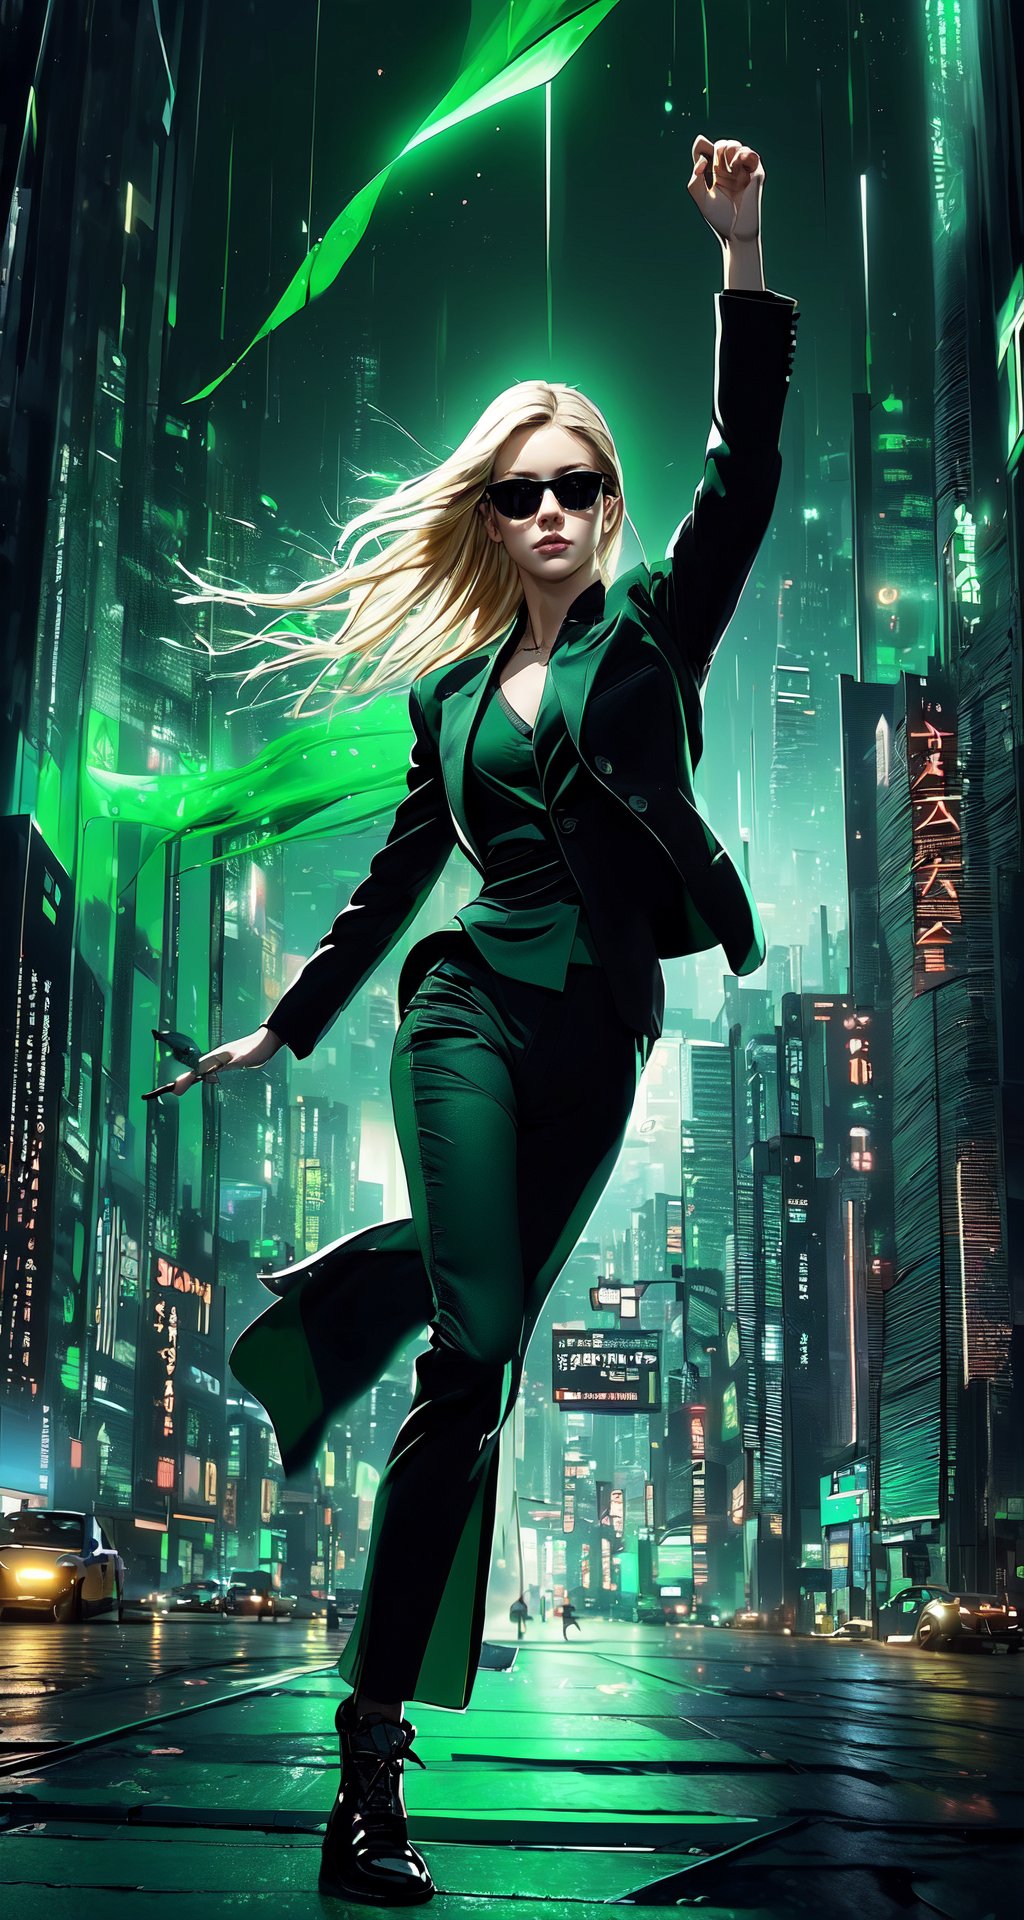 Master masterpiece, high-definition picture quality, matrix style, Matrix, gorgeous movements, ((1boy)), the correct body proportion, black glasses, blonde hair, city, green, floating, all-black suit, dark night, buildings, Code matrix cascading from top to bottom,1 girl, Cyberpunk